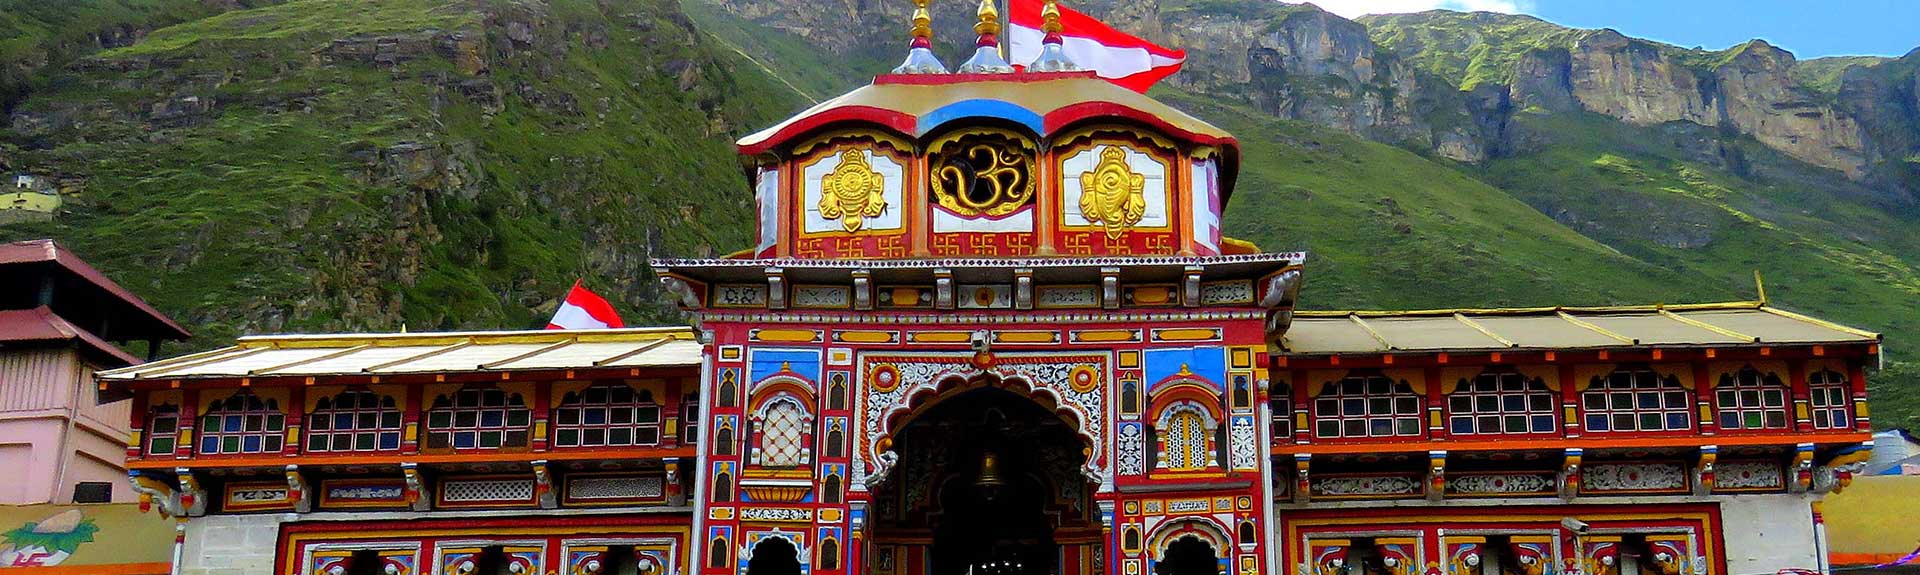 Cheap Chardham 2018 Tour Packages